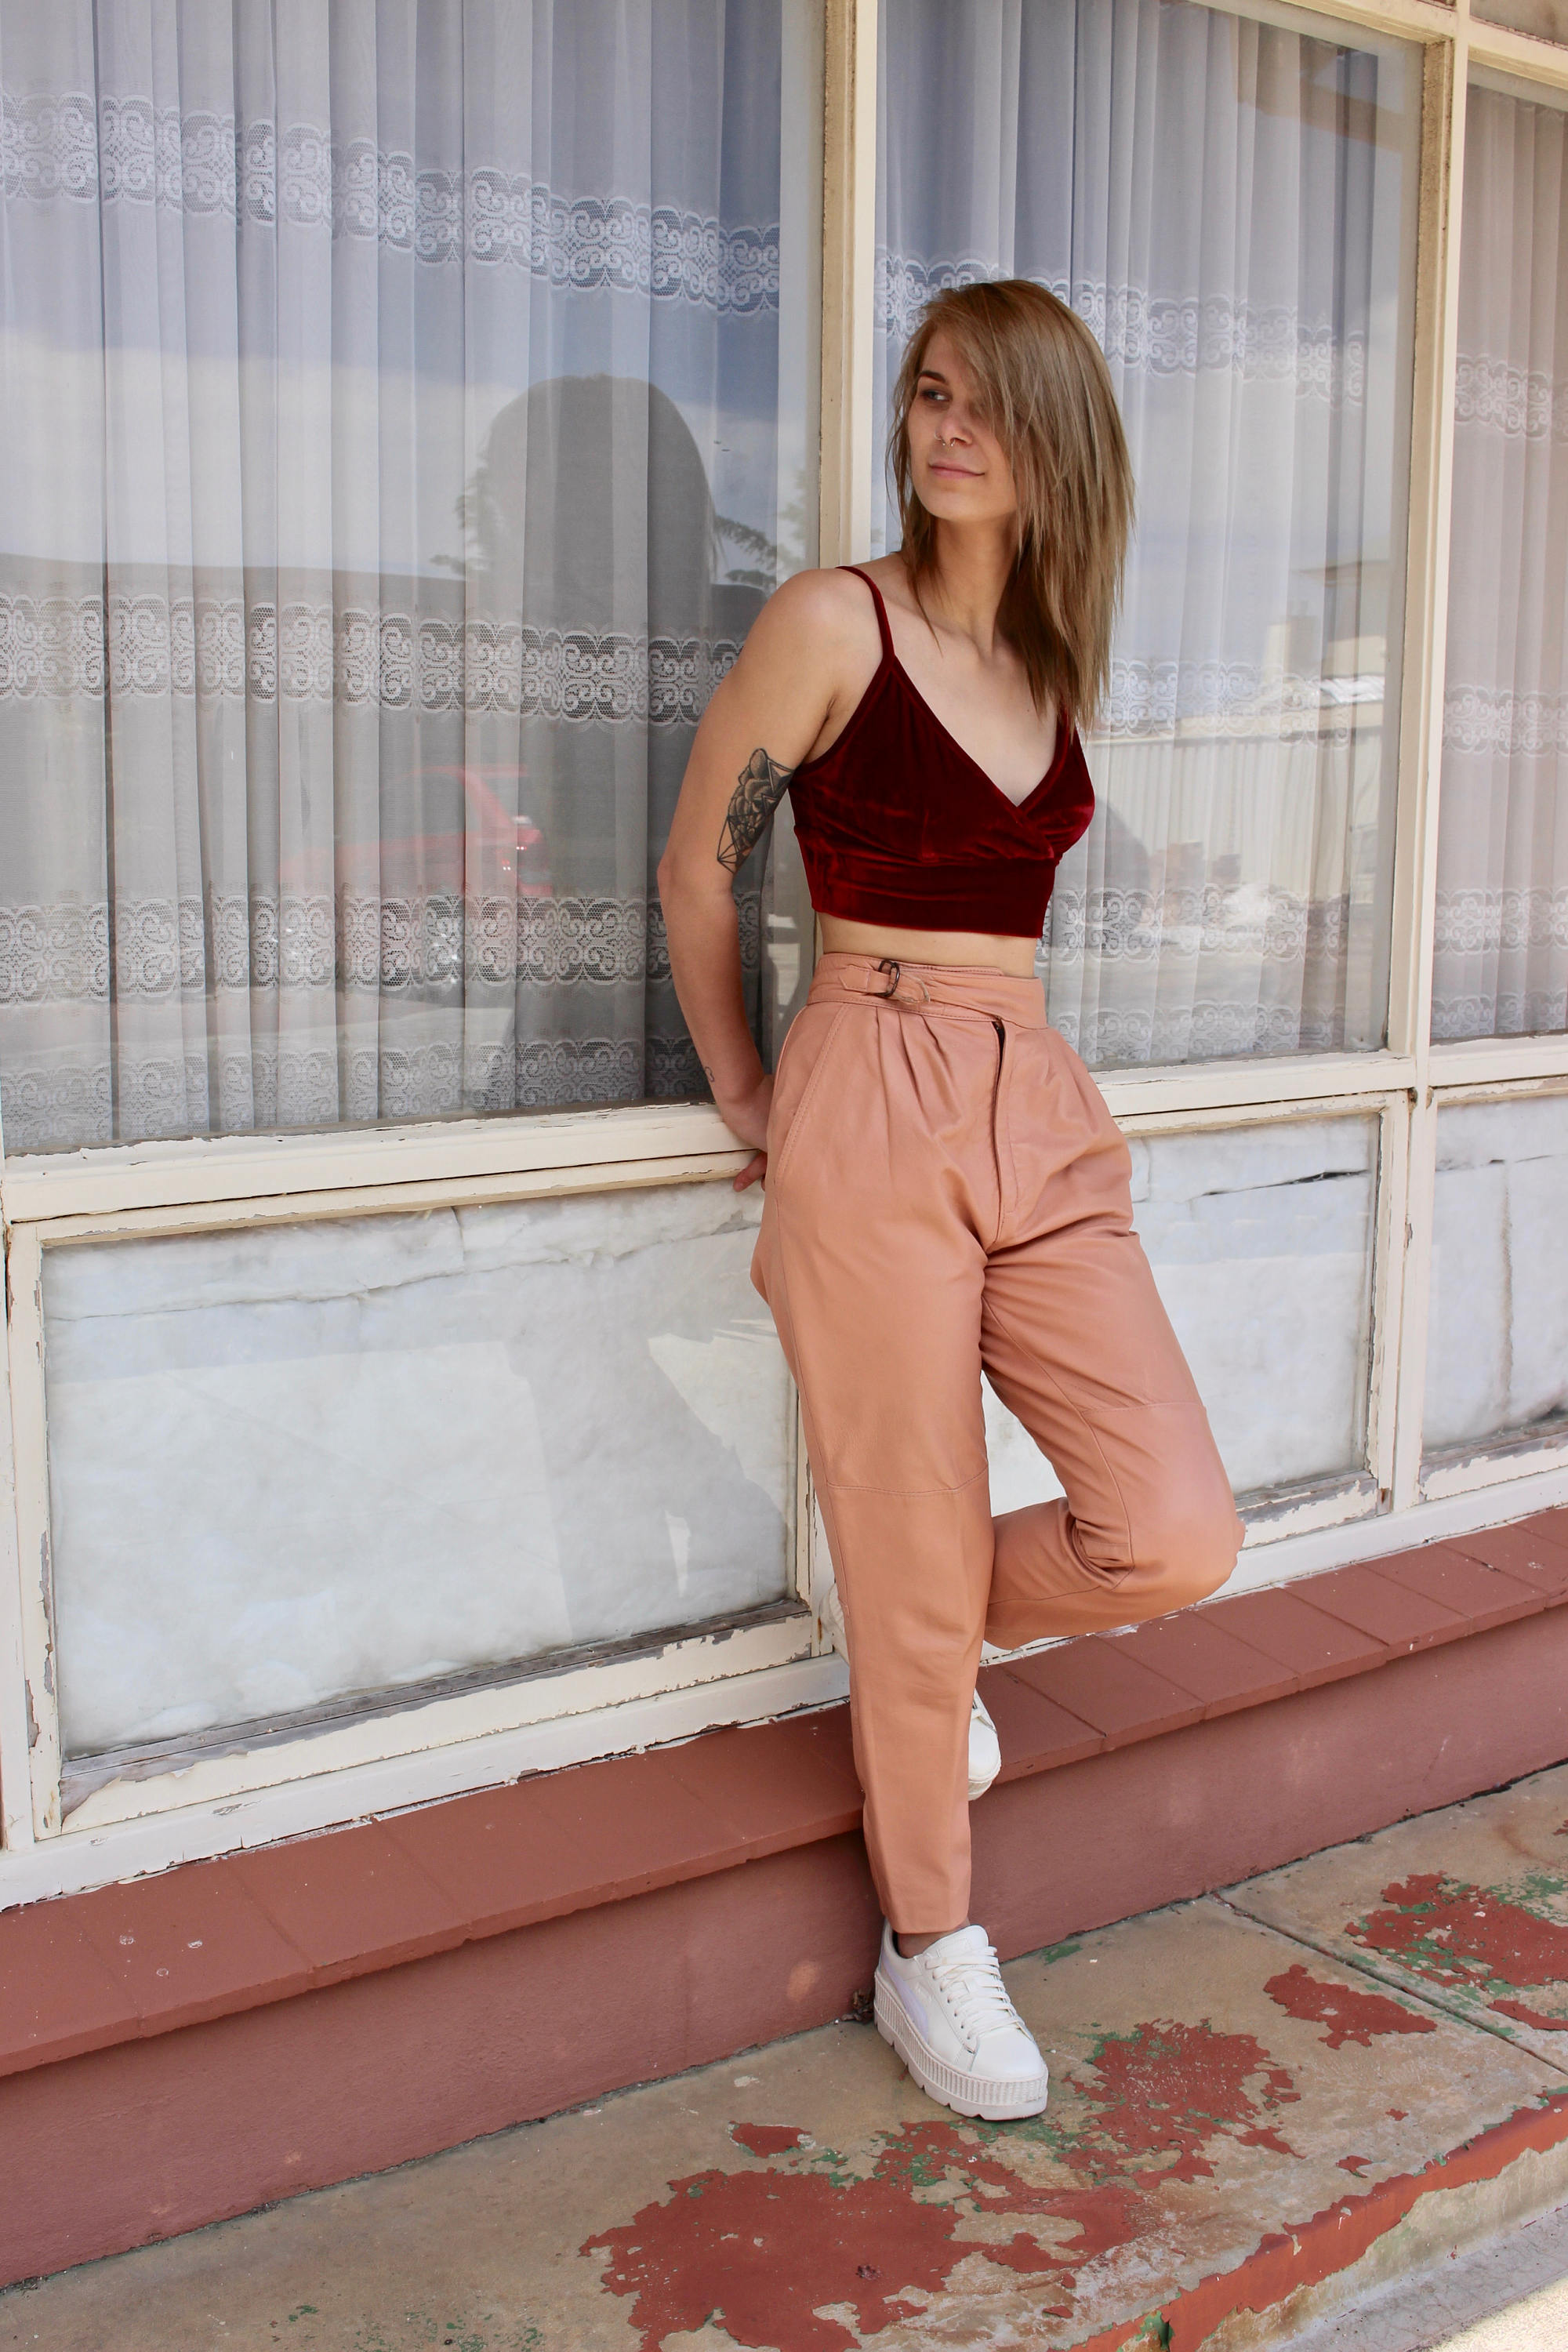 Baggy Pants Woman - Pink Gift For Girlfriend - Boho Festival Pants - Leather Pants - Leather Gift Ideas For Her - Tight Leather Pants